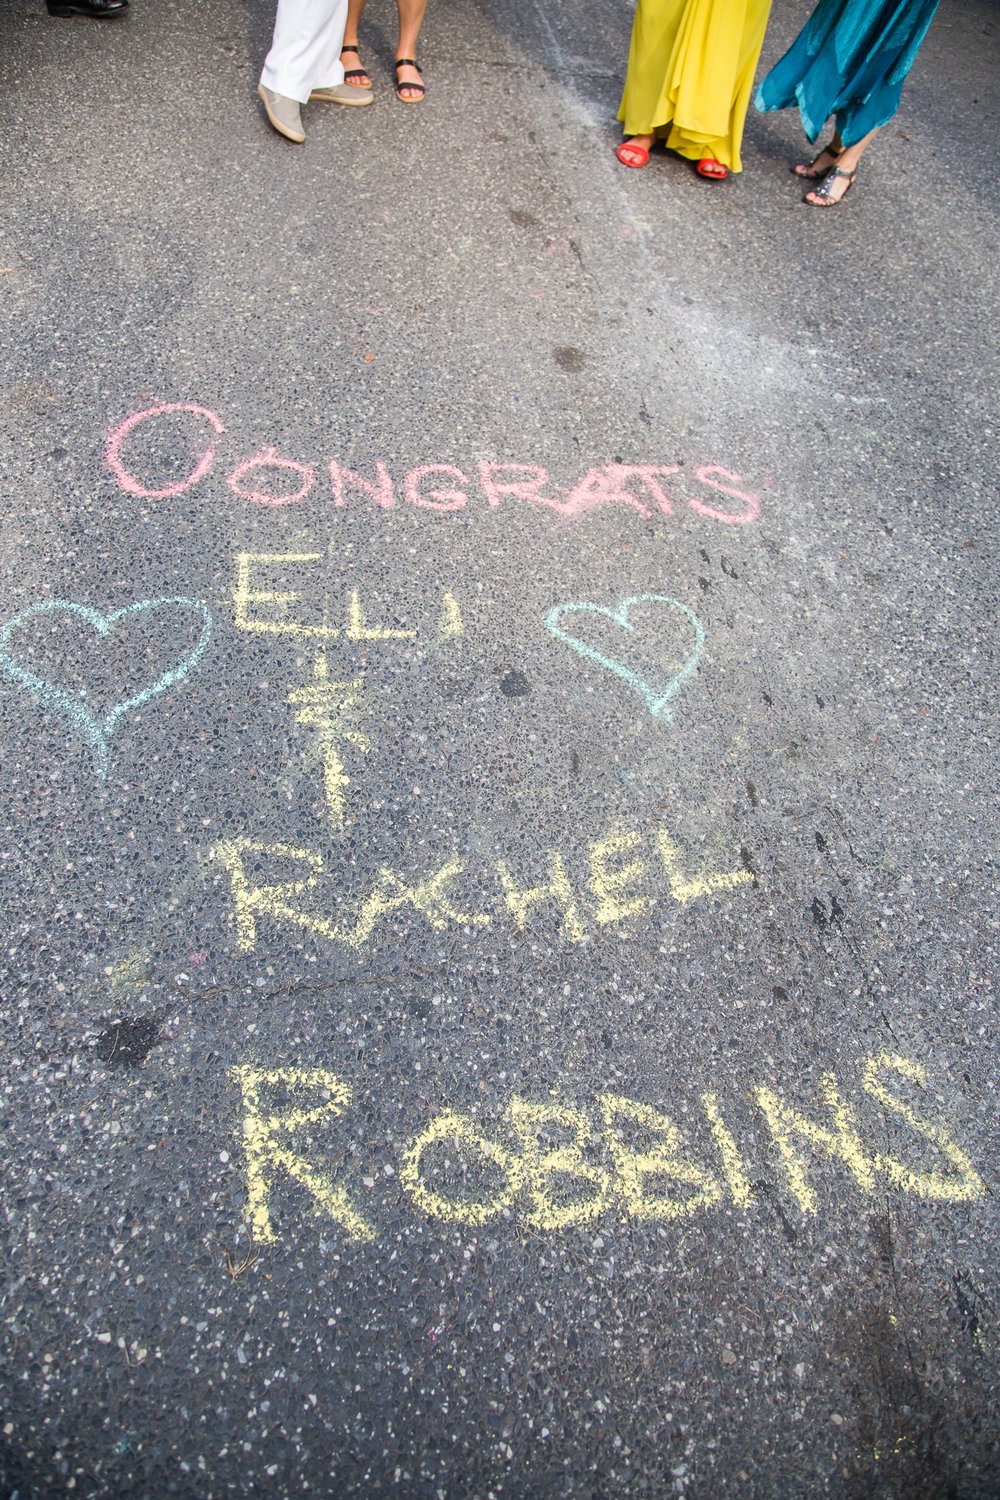 Chalk art on street pavement celebrating wedding couple, guests feet in background, Philly documentary photography